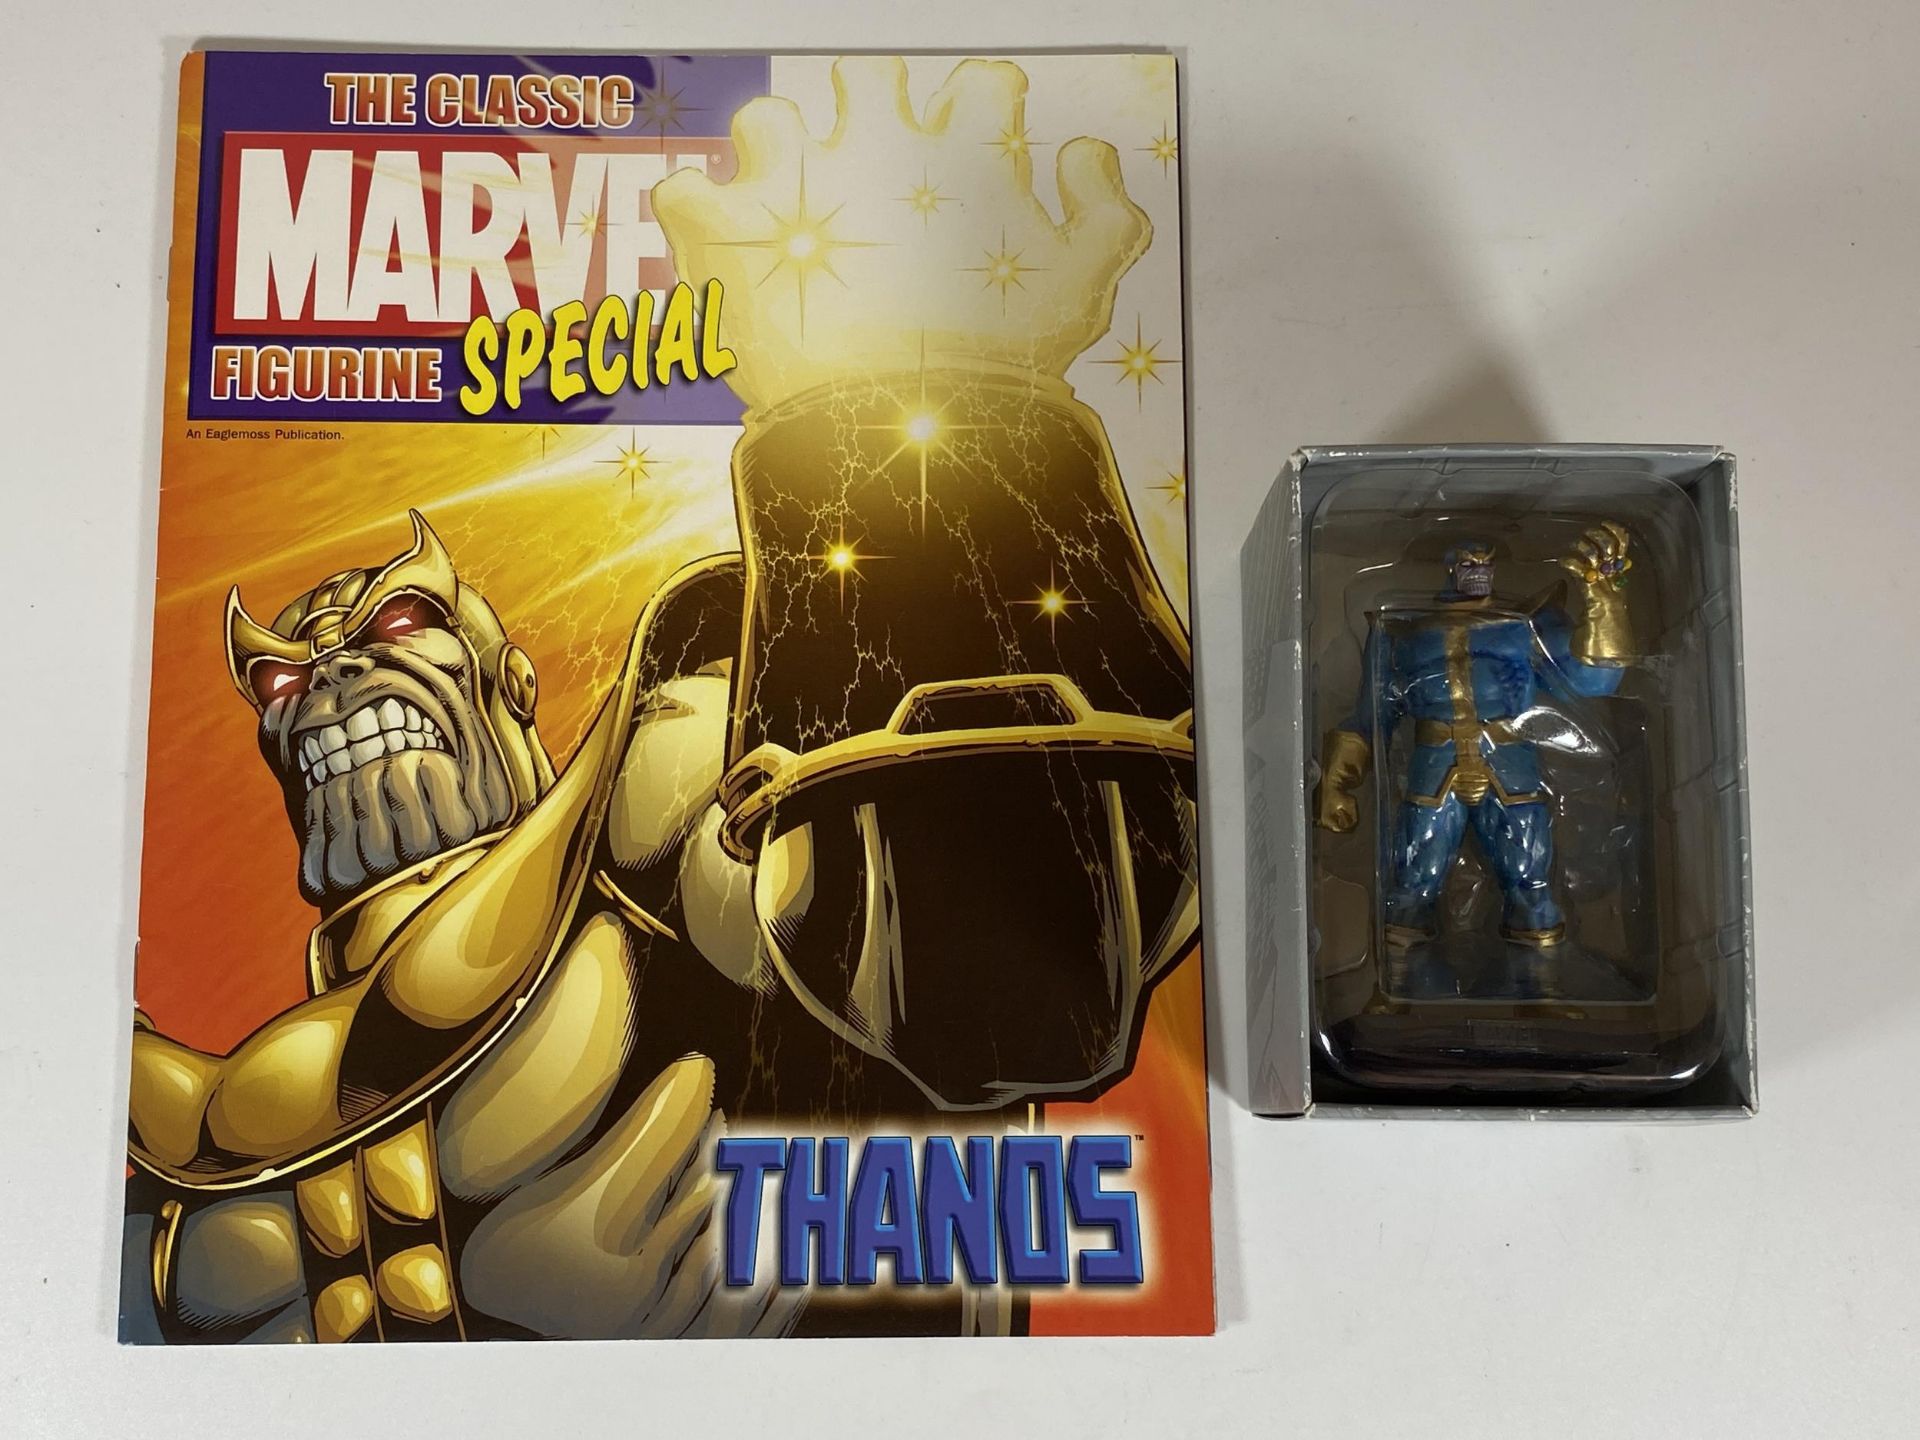 A MARVEL CLASSIC LEAD SPECIAL COLLECTORS FIGURE - THANOS WITH MAGAZINE - Image 2 of 5